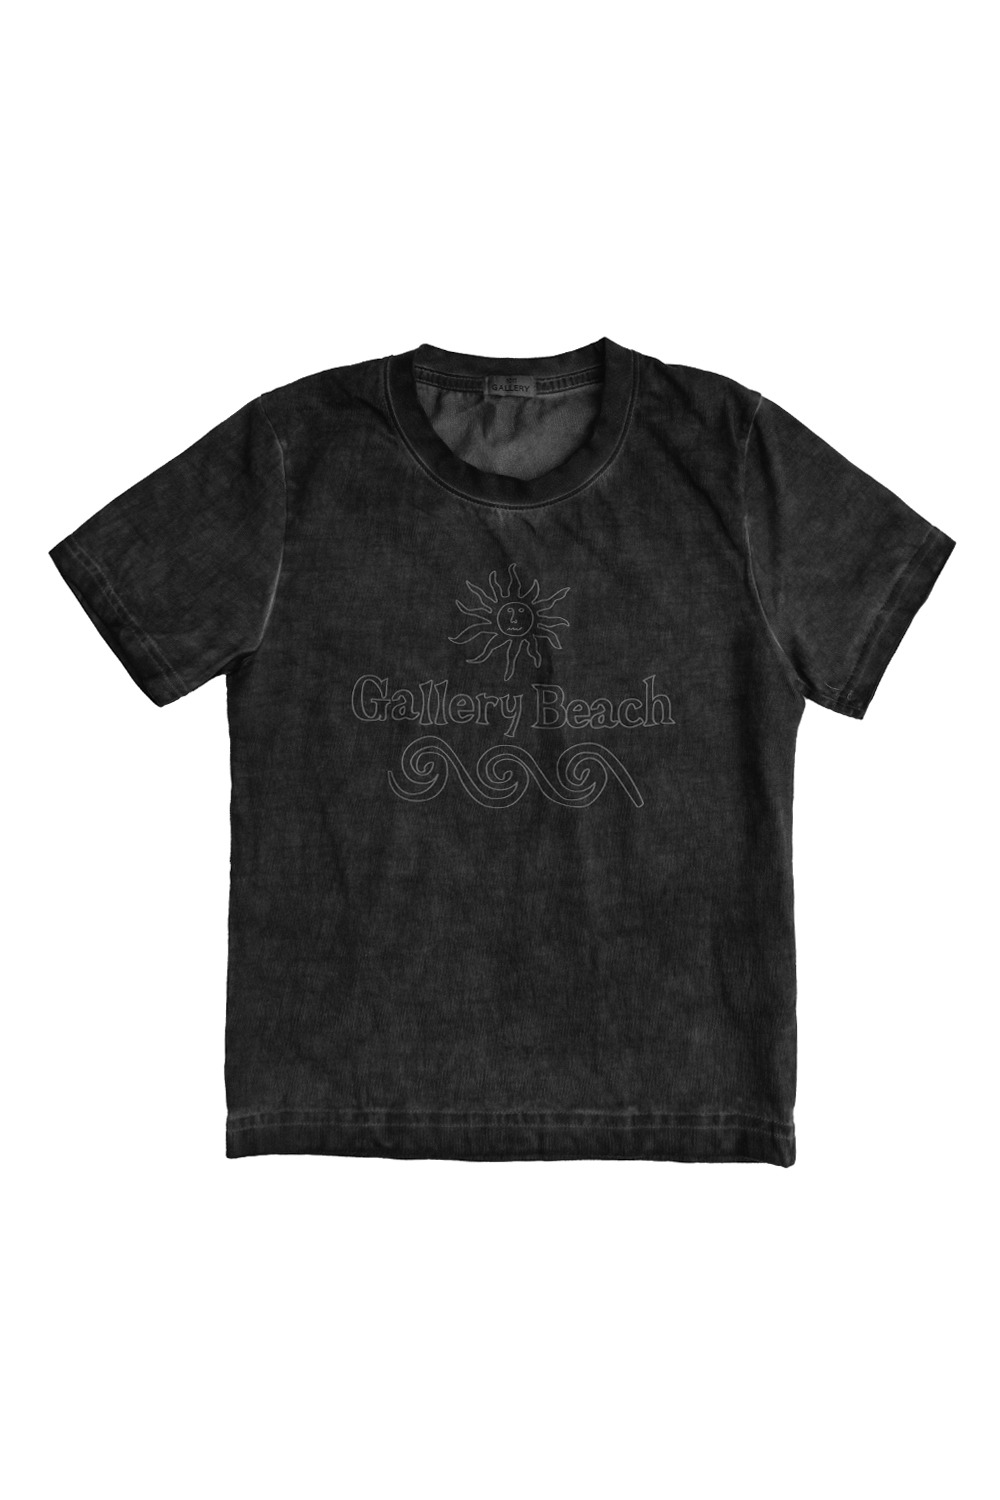 Gallery Beach Dying T-shirt - Charcoal Grey